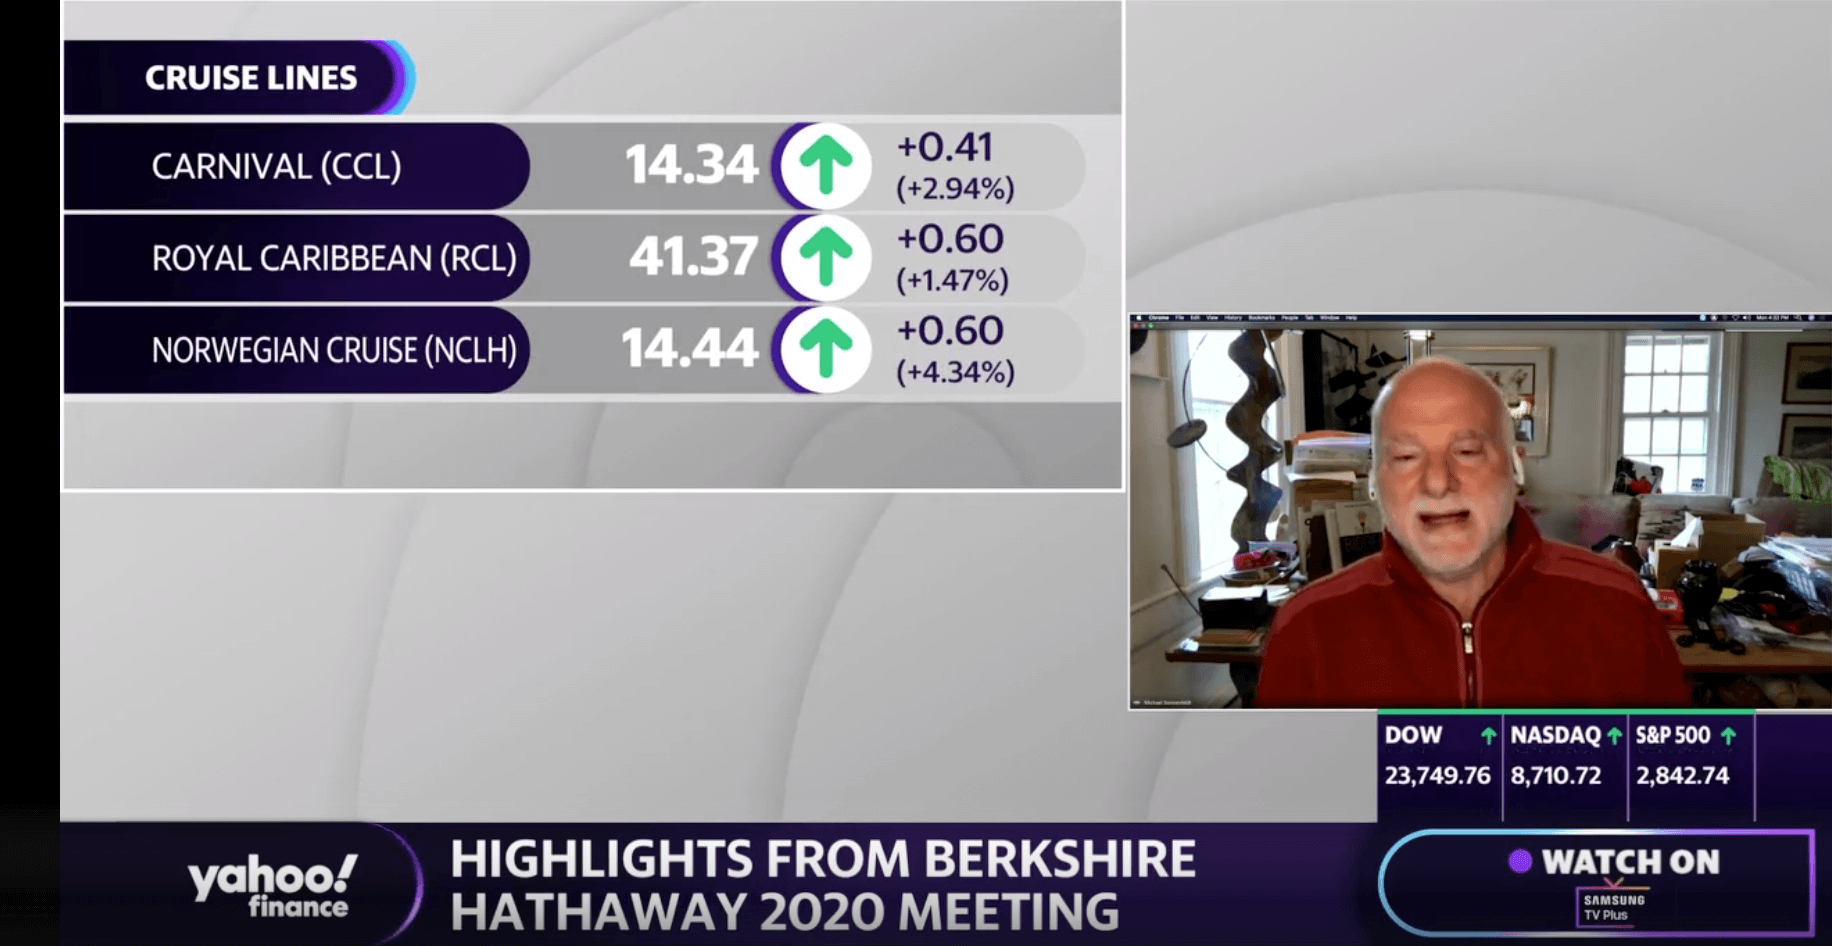 BERKSHIRE HATHAWAY ANNUAL SHAREHOLDERS MEETING: YAHOO! FINANCE INTERVIEWS TIGER 21 FOUNDER ON REACTIONS